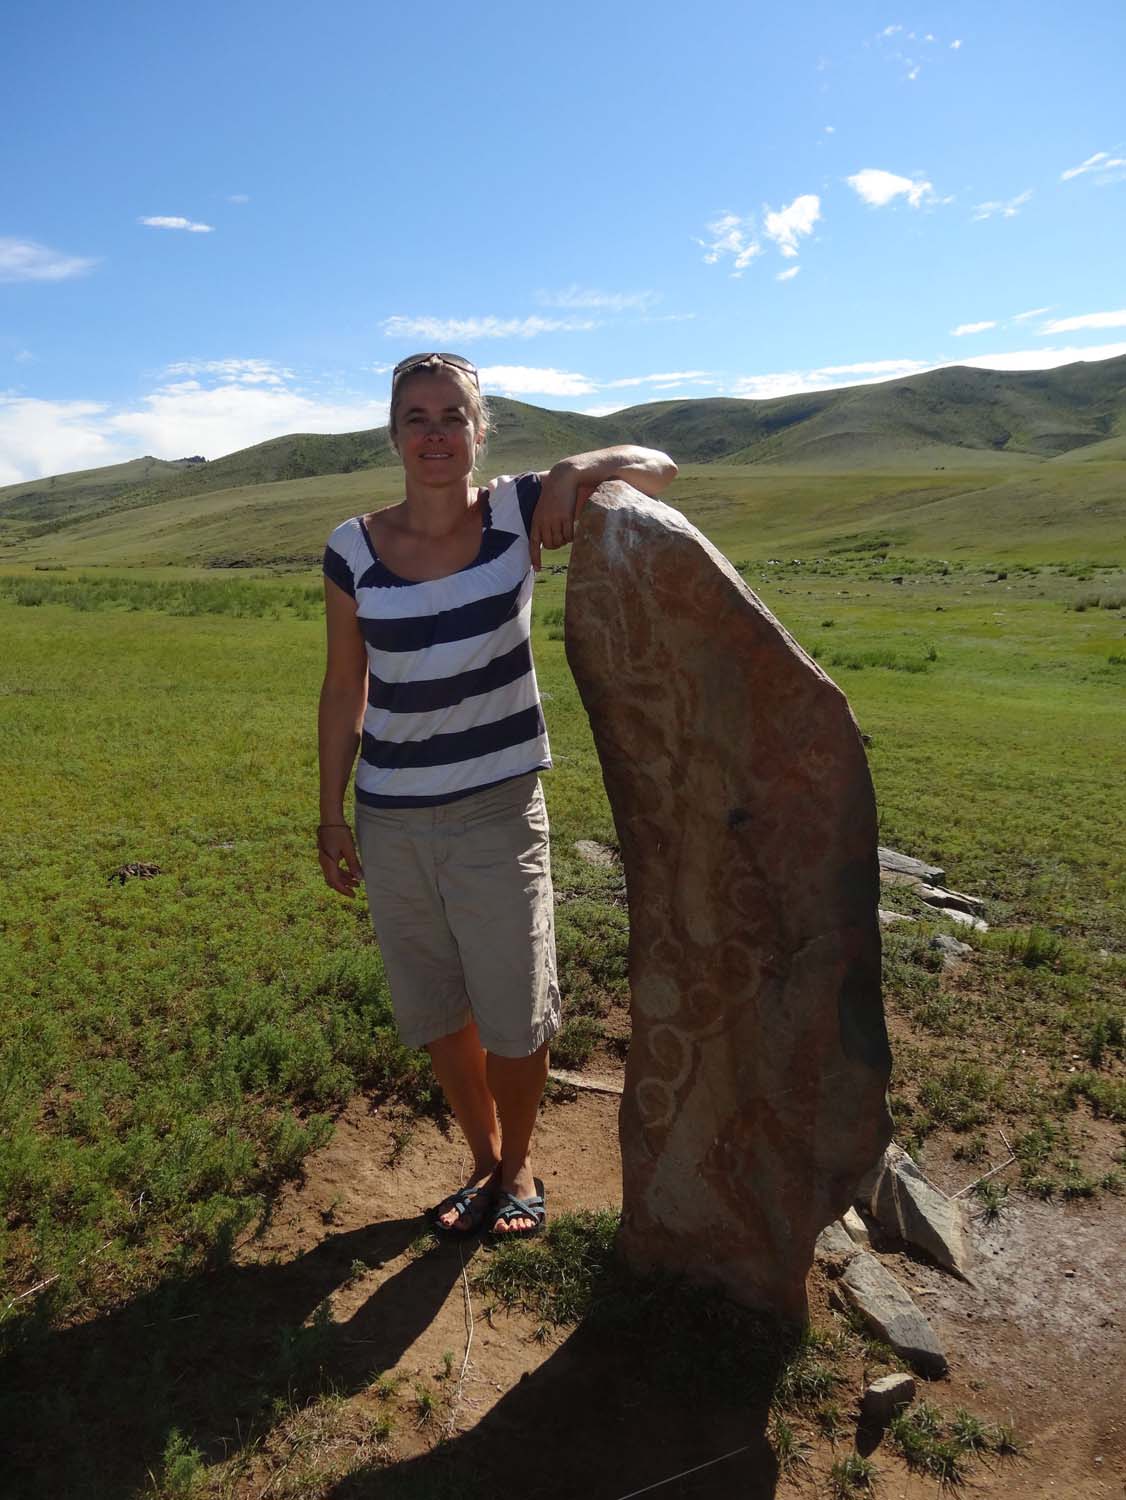 one of many deer stones in Mongolia, not many remain in situ, most have been carted off to various musea